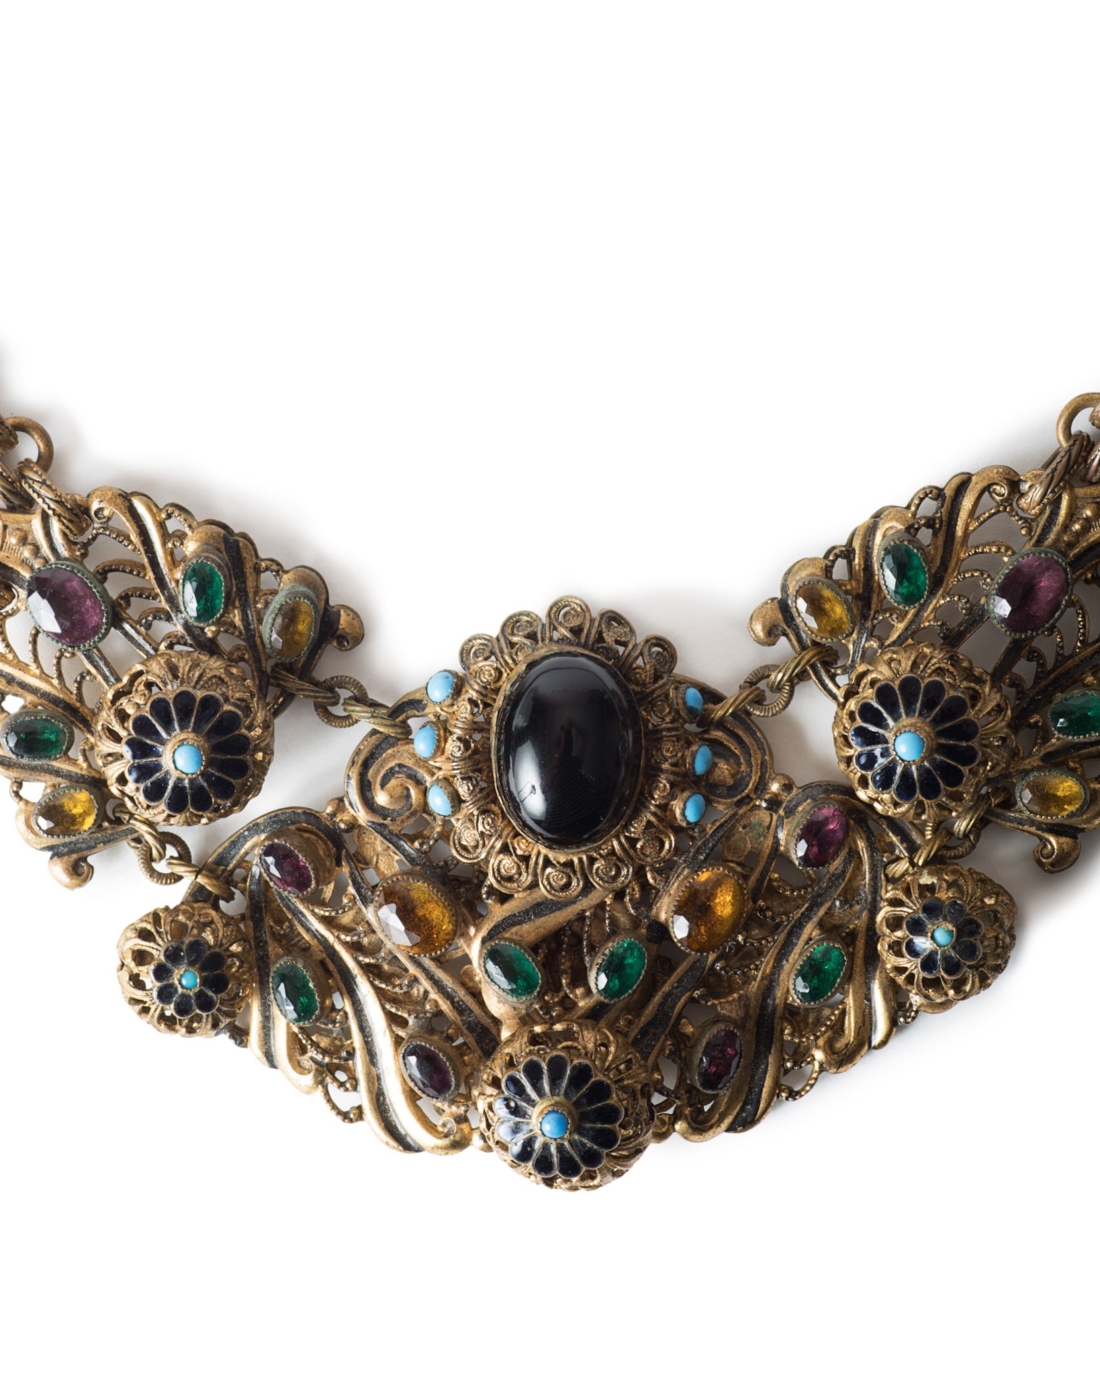 Exquisite Austro-Hungarian Enameled Necklace on Gingerbread Chain, circa 1930's